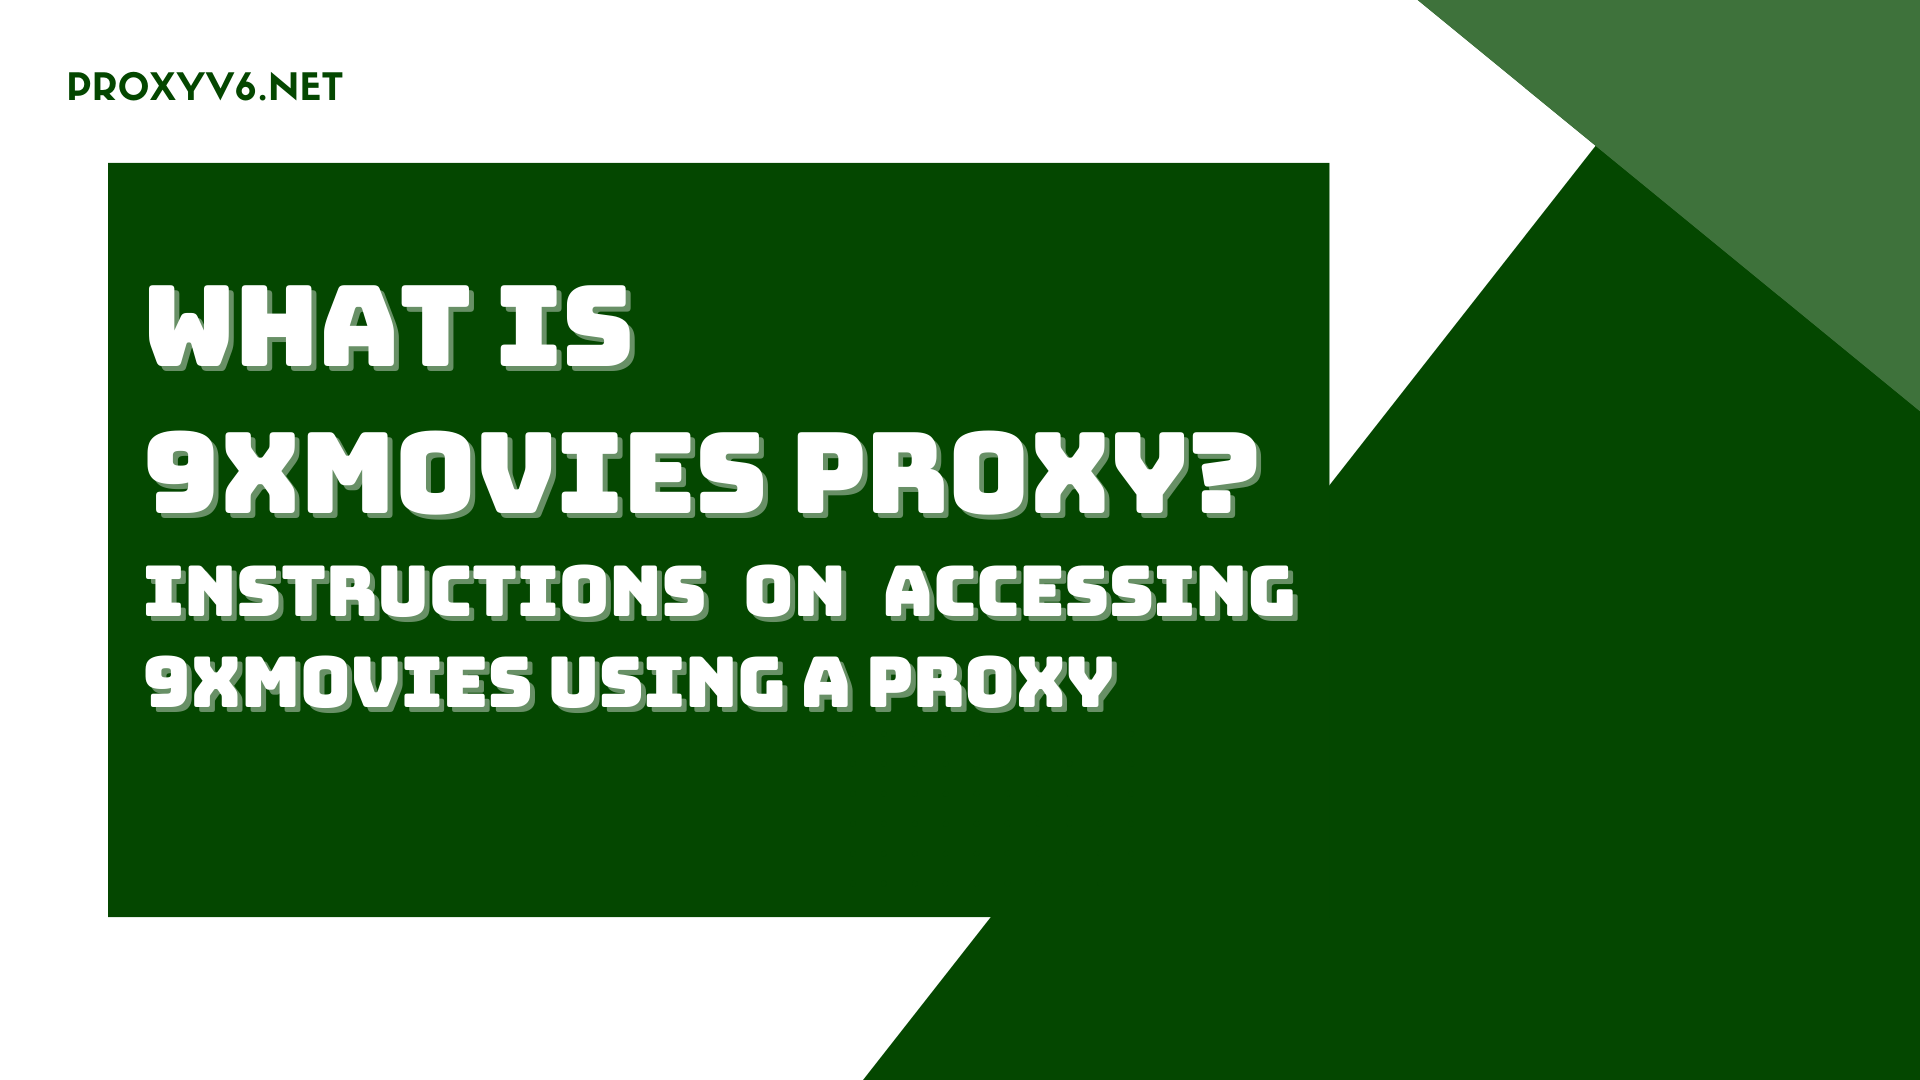 What is 9xmovies Proxy? Instructions on accessing 9xmovies using a Proxy